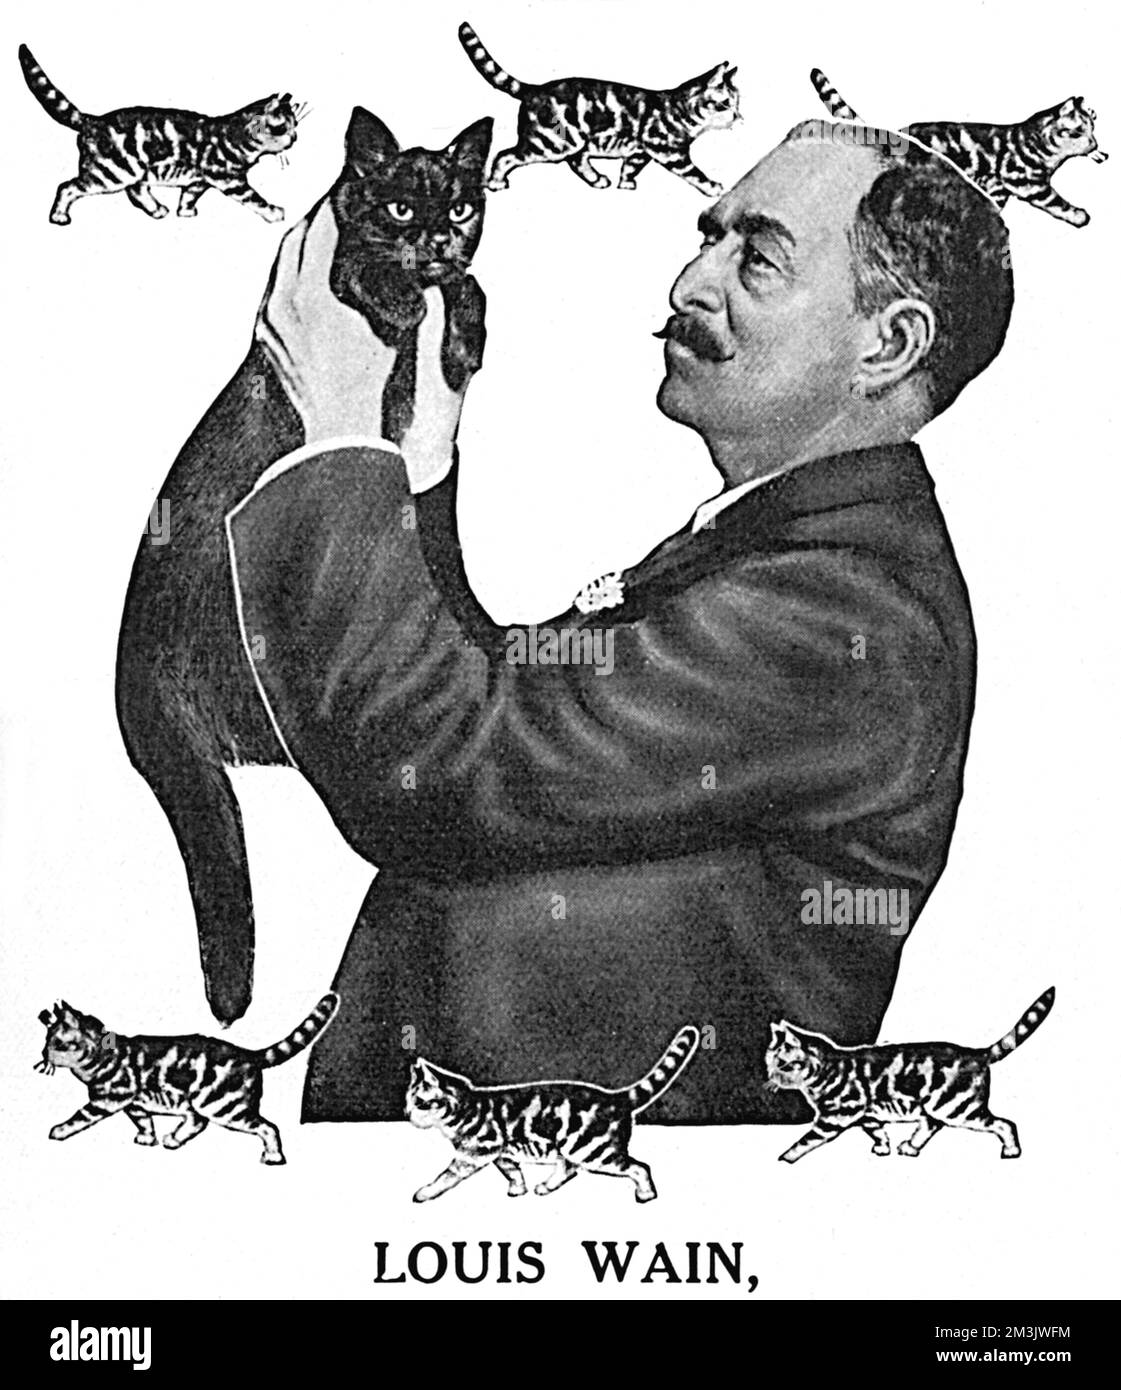 Louis Wain taken from an advertisement for Phosferine, a tonic medicine, featuring Louis Wain, the famous cat artist. Wain testifies that the tonic, '...is a good pick-me-up, improves one's appetite and possesses very striking invigorating properties'. Wain was able to turn his hand to drawing a wide variety of animals prior to the fame he achieved with his feline creations. Sadly his growing obsession with cats turned to insanity and he died penniless in a mental asylum in 1939. Stock Photo